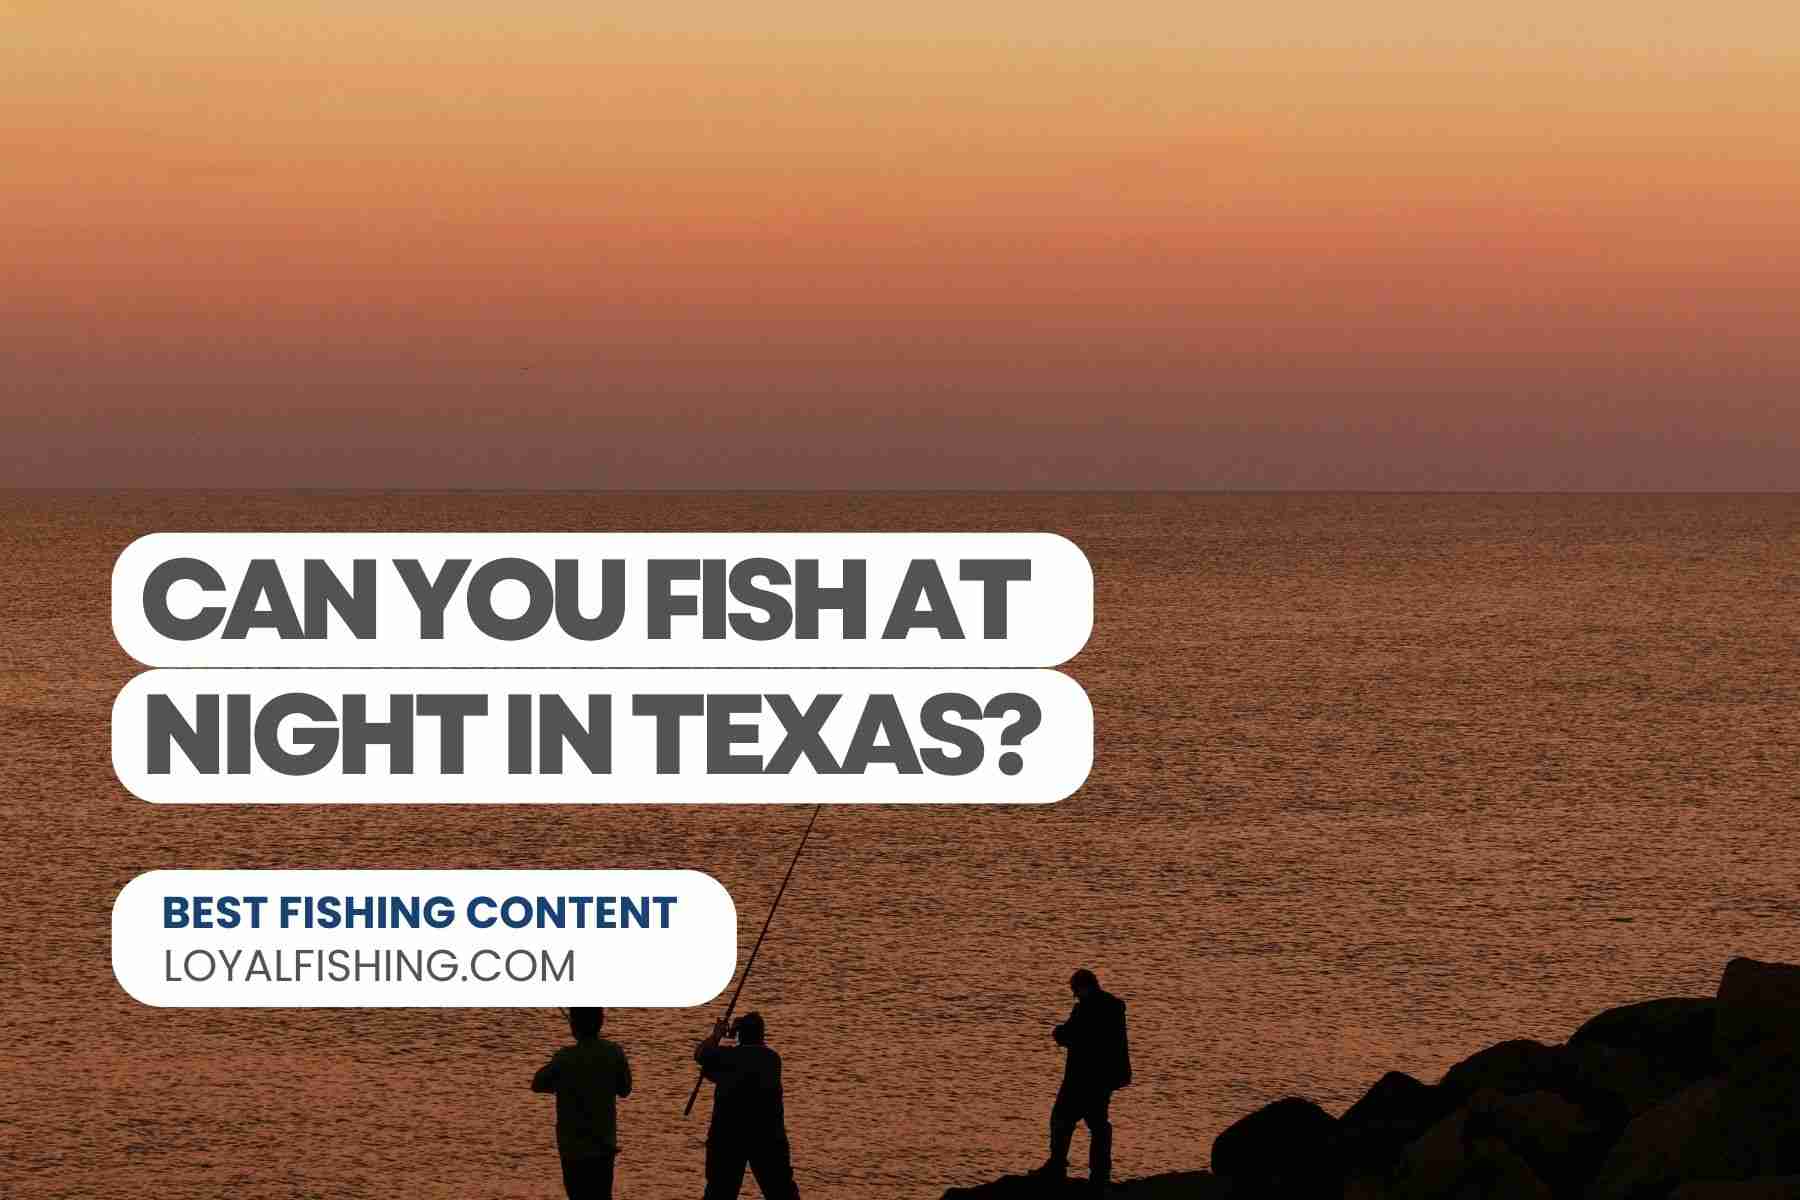 Yes, you can fish at night in texas. Fishing at night is allowed in texas waters. Nighttime fishing in texas provides a unique and thrilling experience for anglers